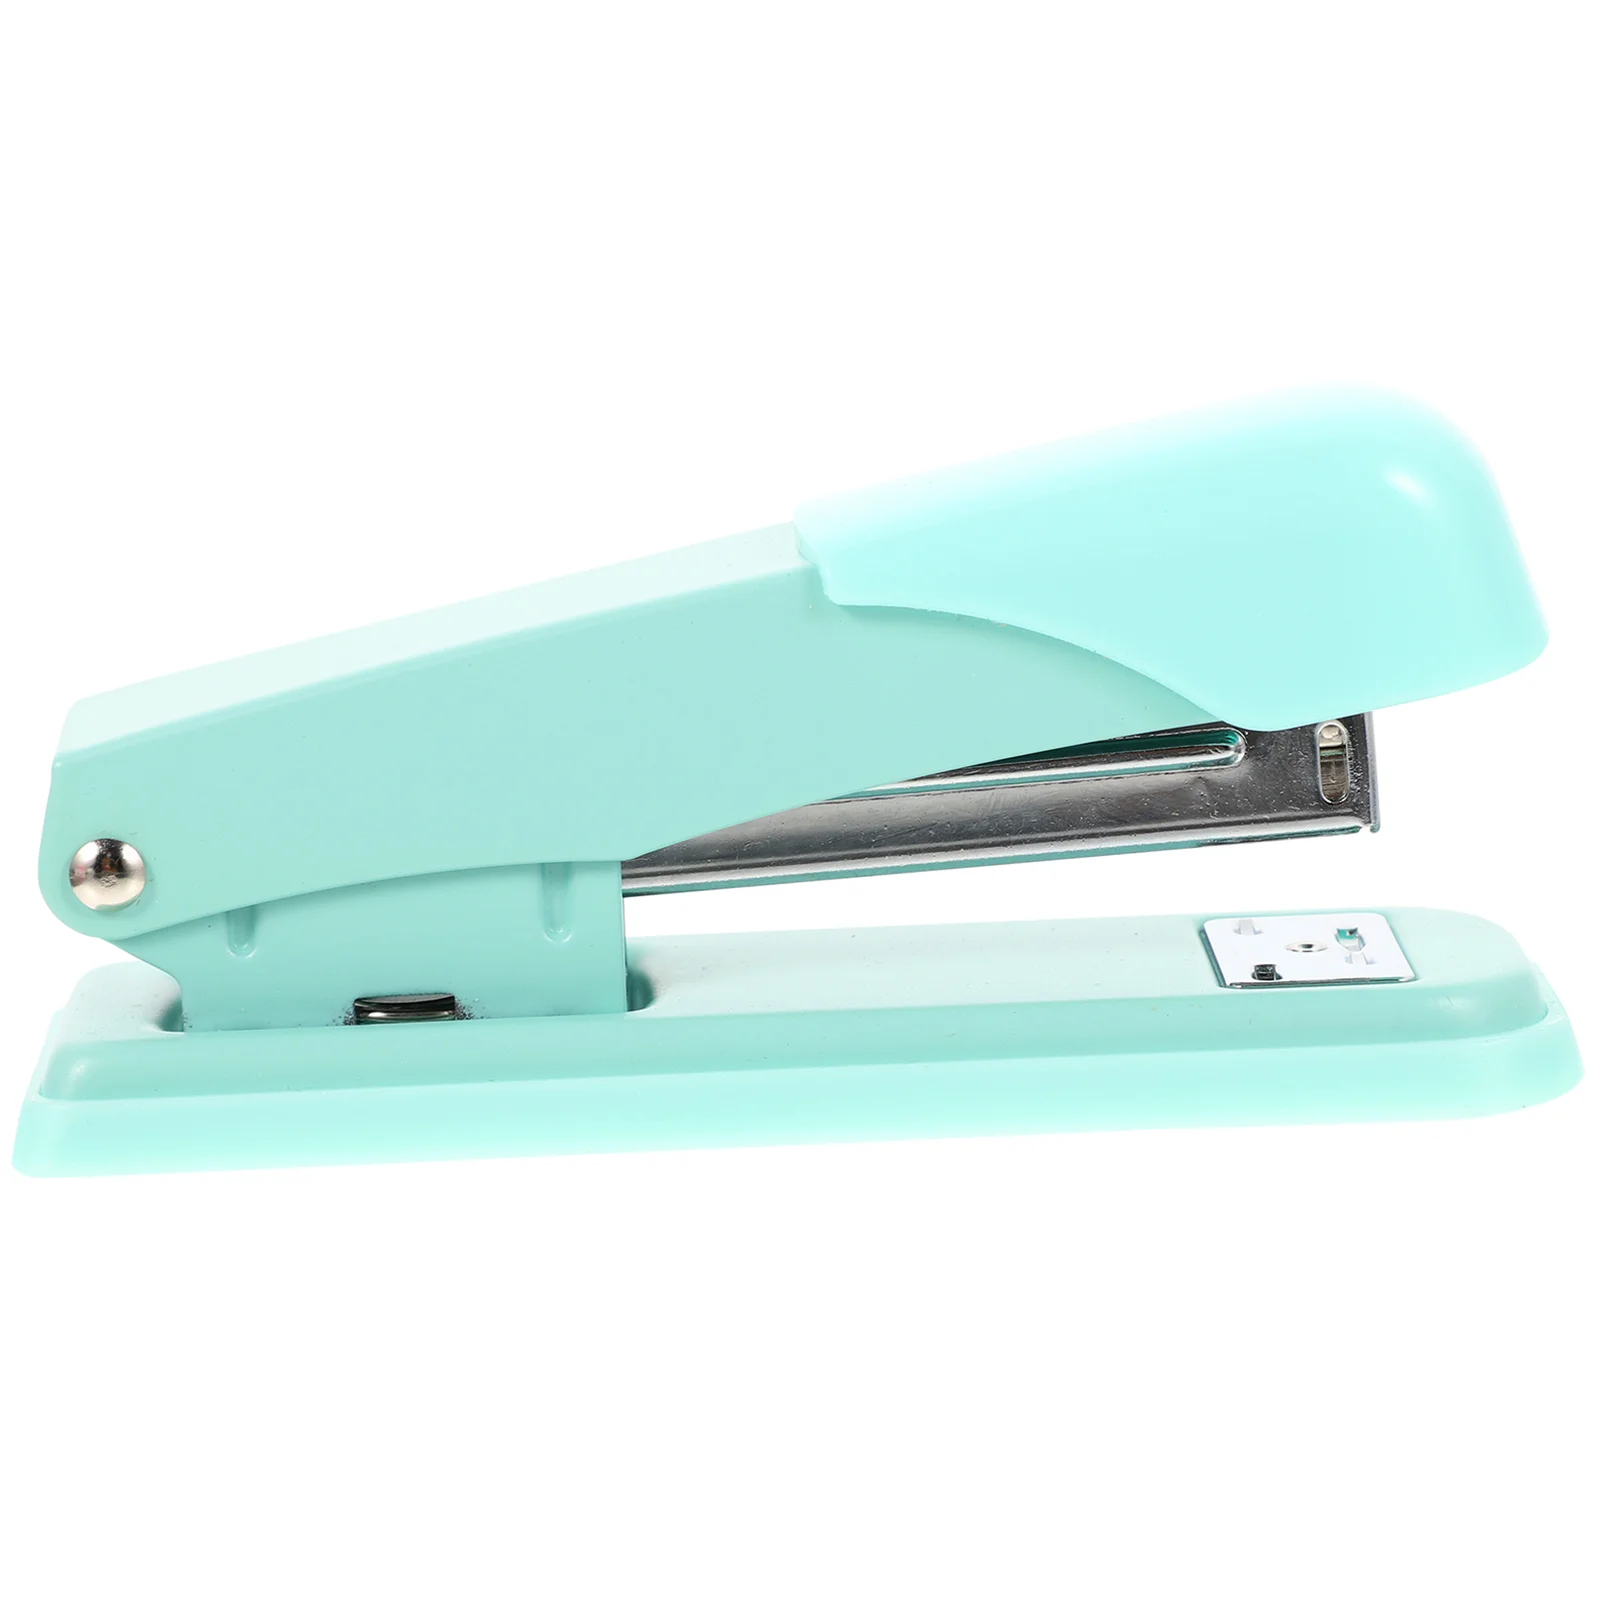 

Stapler Tiny Classroom Tape Desk Tool Metal Multipurpose Paper Staplers Heavy Duty Handheld Office Compact Small Stamp